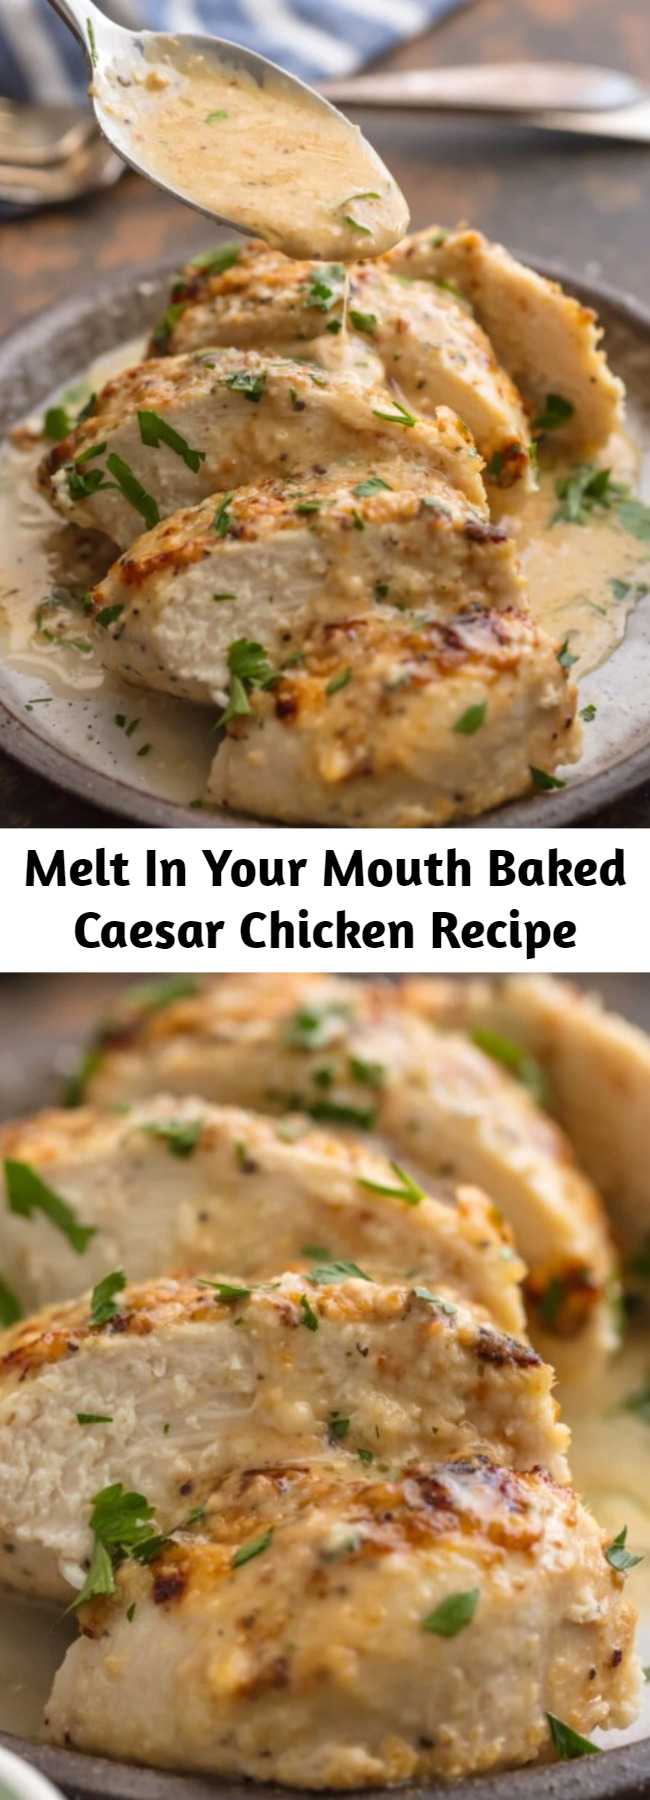 Melt In Your Mouth Baked Caesar Chicken Recipe - Caesar Chicken is the ideal melt in your mouth recipe! It is creamy, easy, and full of flavor. This simple chicken recipe just includes 4 Ingredients and requires less than half an hour.